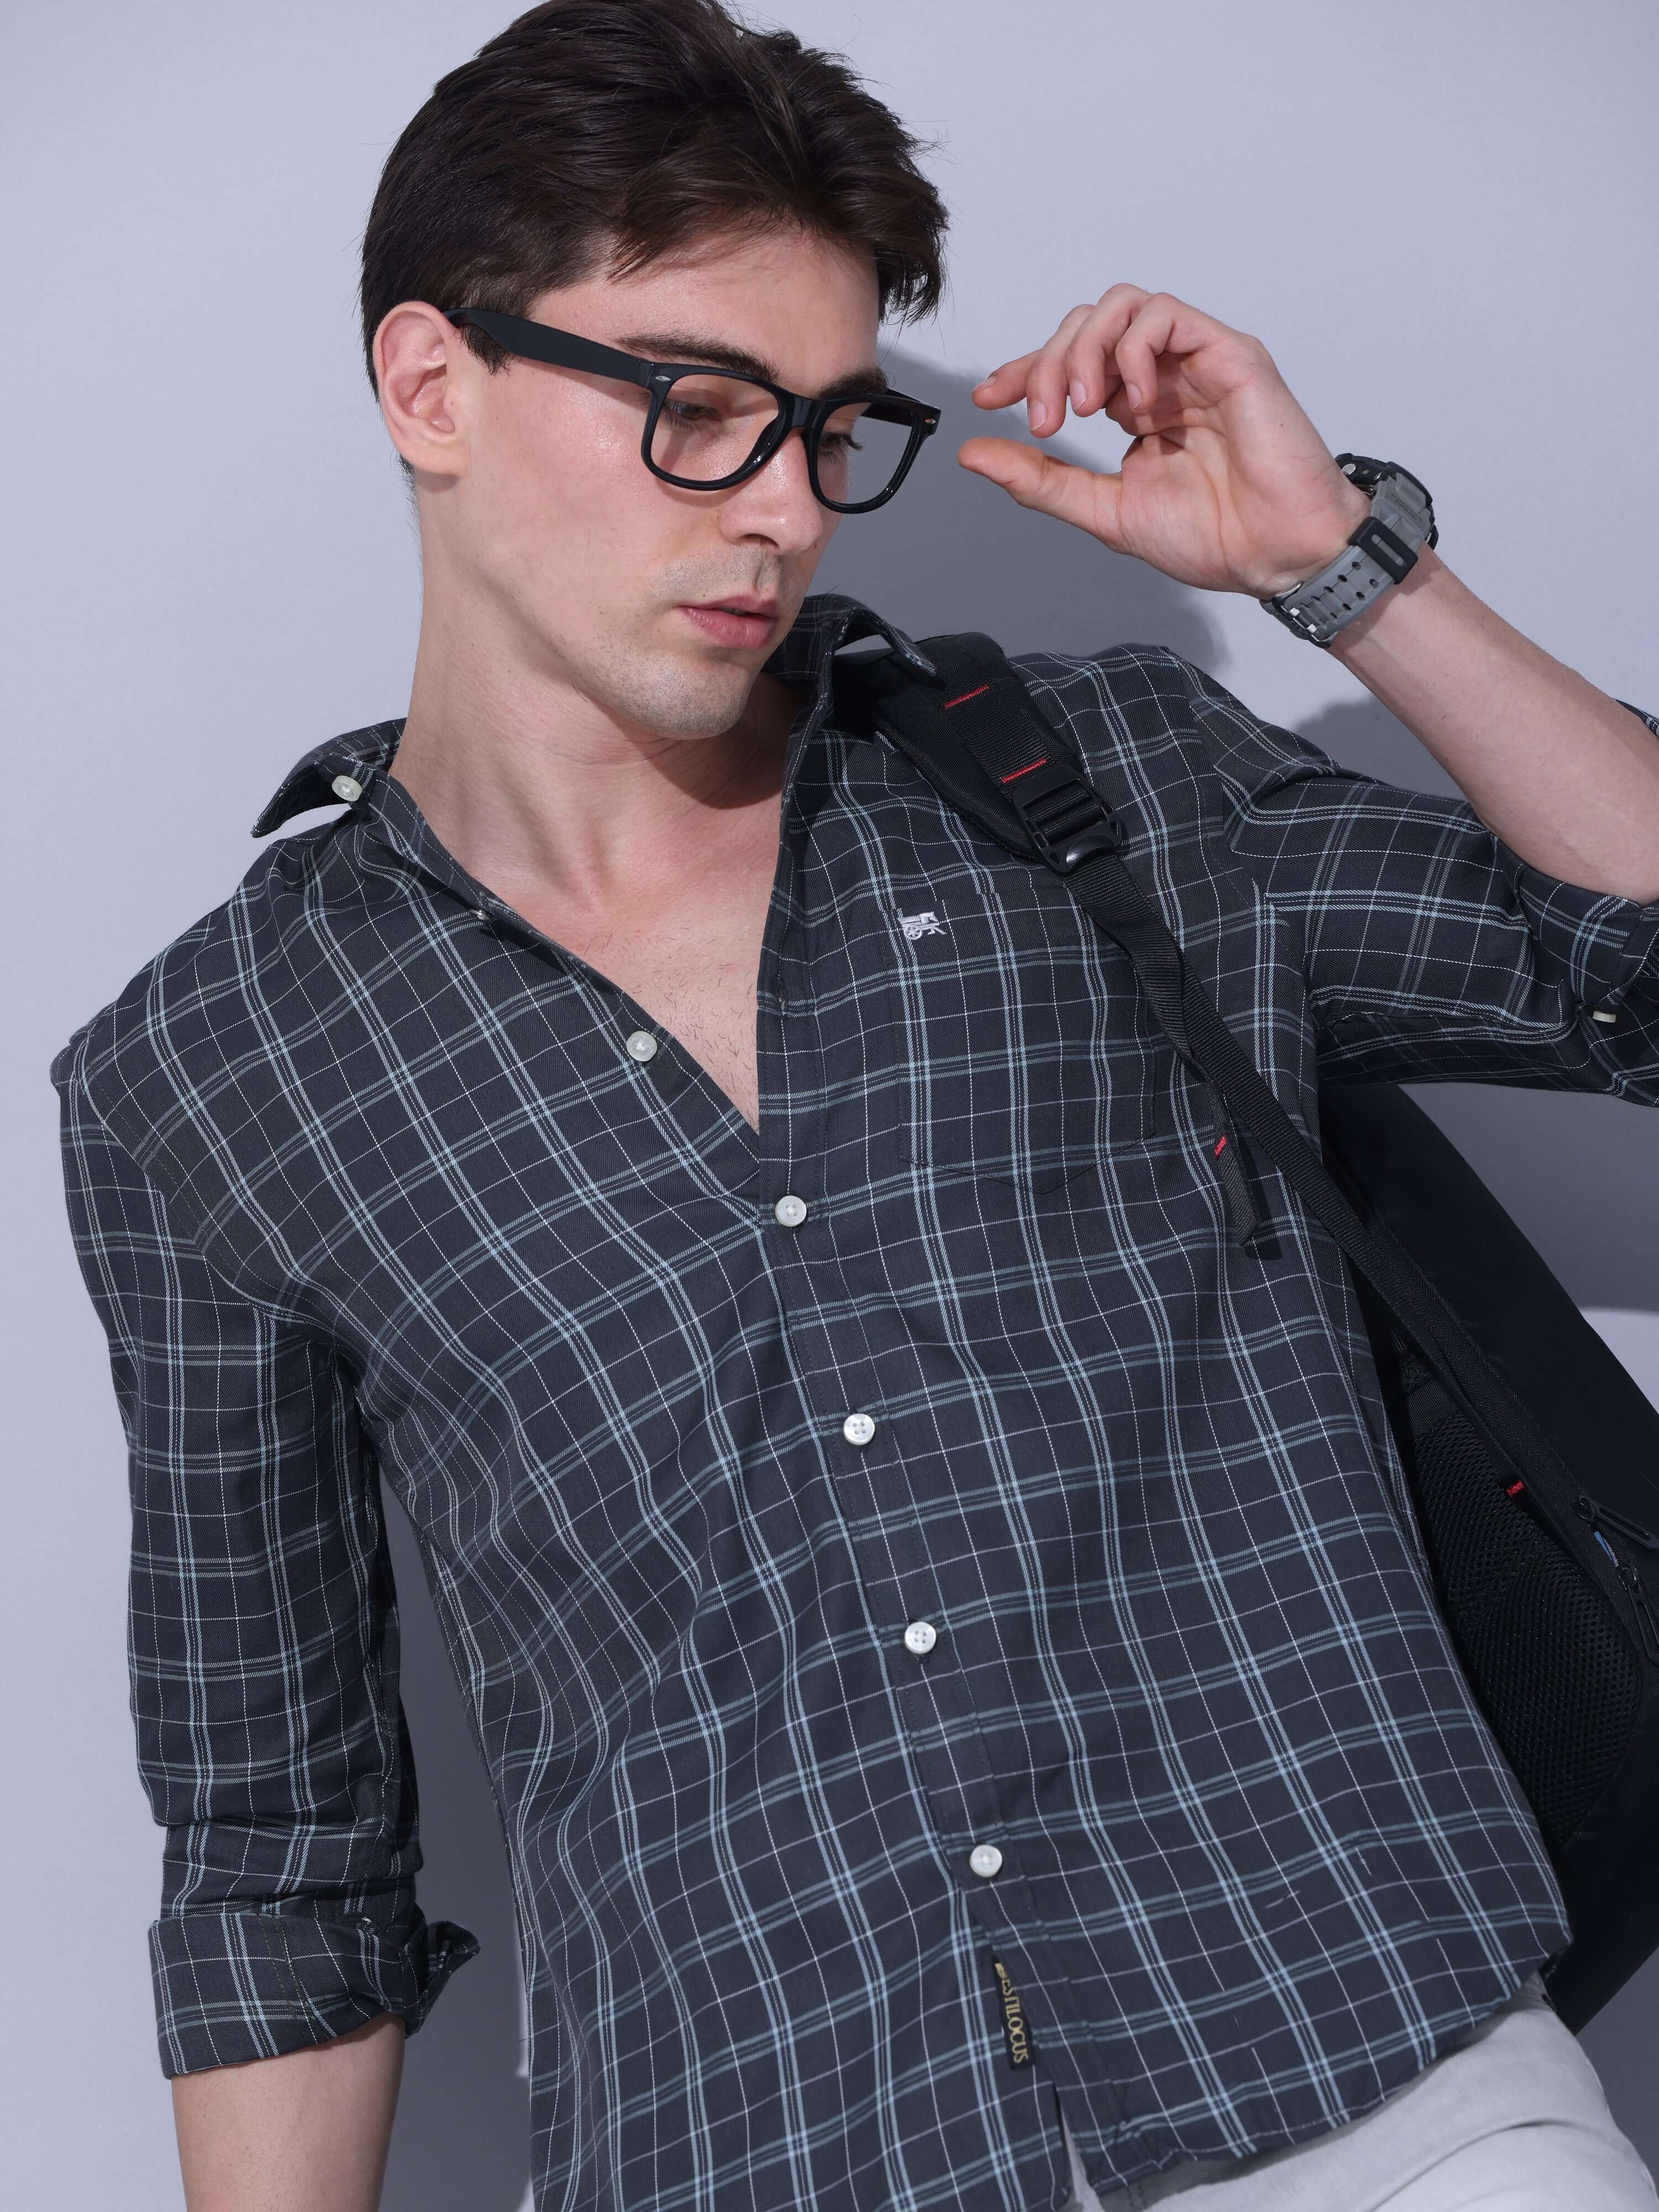 Green Checks Casual Shirt shop online at Estilocus. • Full-sleeve check shirt • Cut and sew placket • Regular collar • Double button square cuff. • Single pocket with logo embroidery • Curved hemline • Finest quality sewing • Machine wash care • Suitable